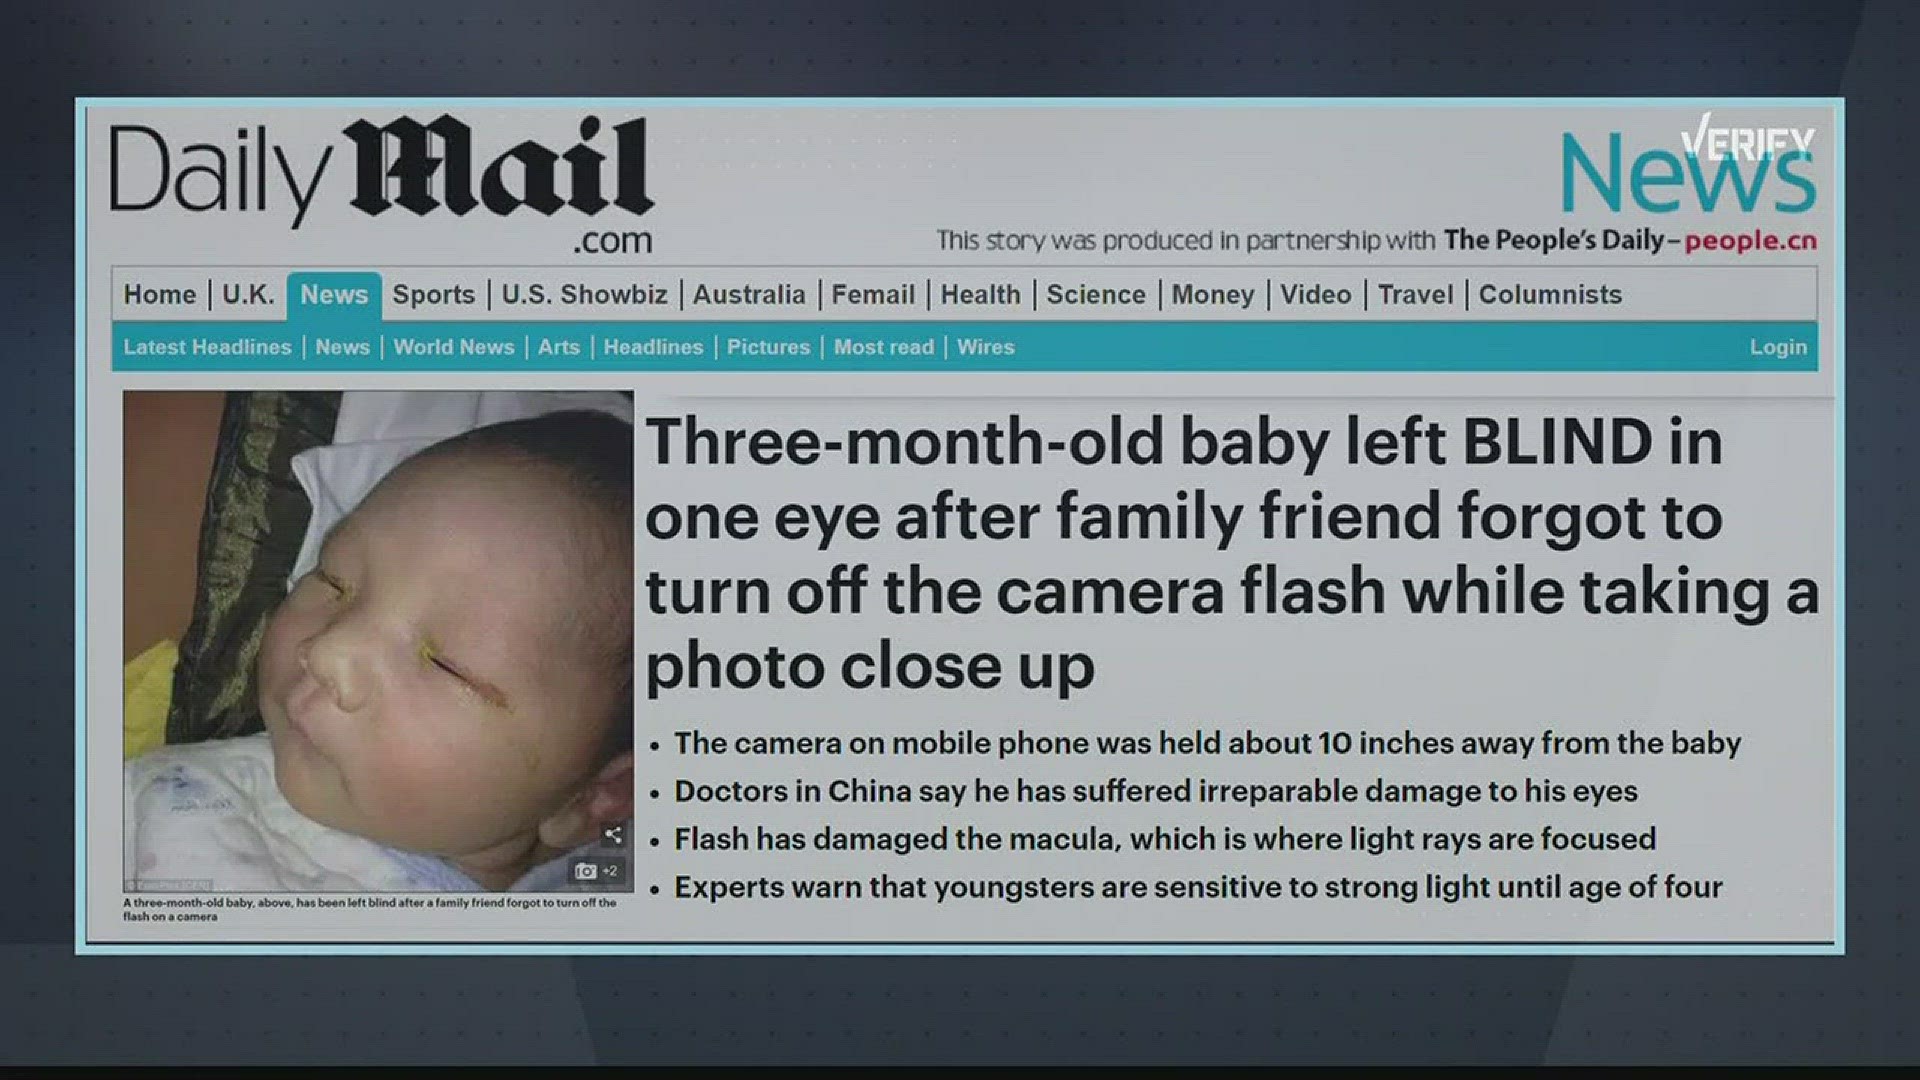 VERIFY: Can a flash photo blind a baby?